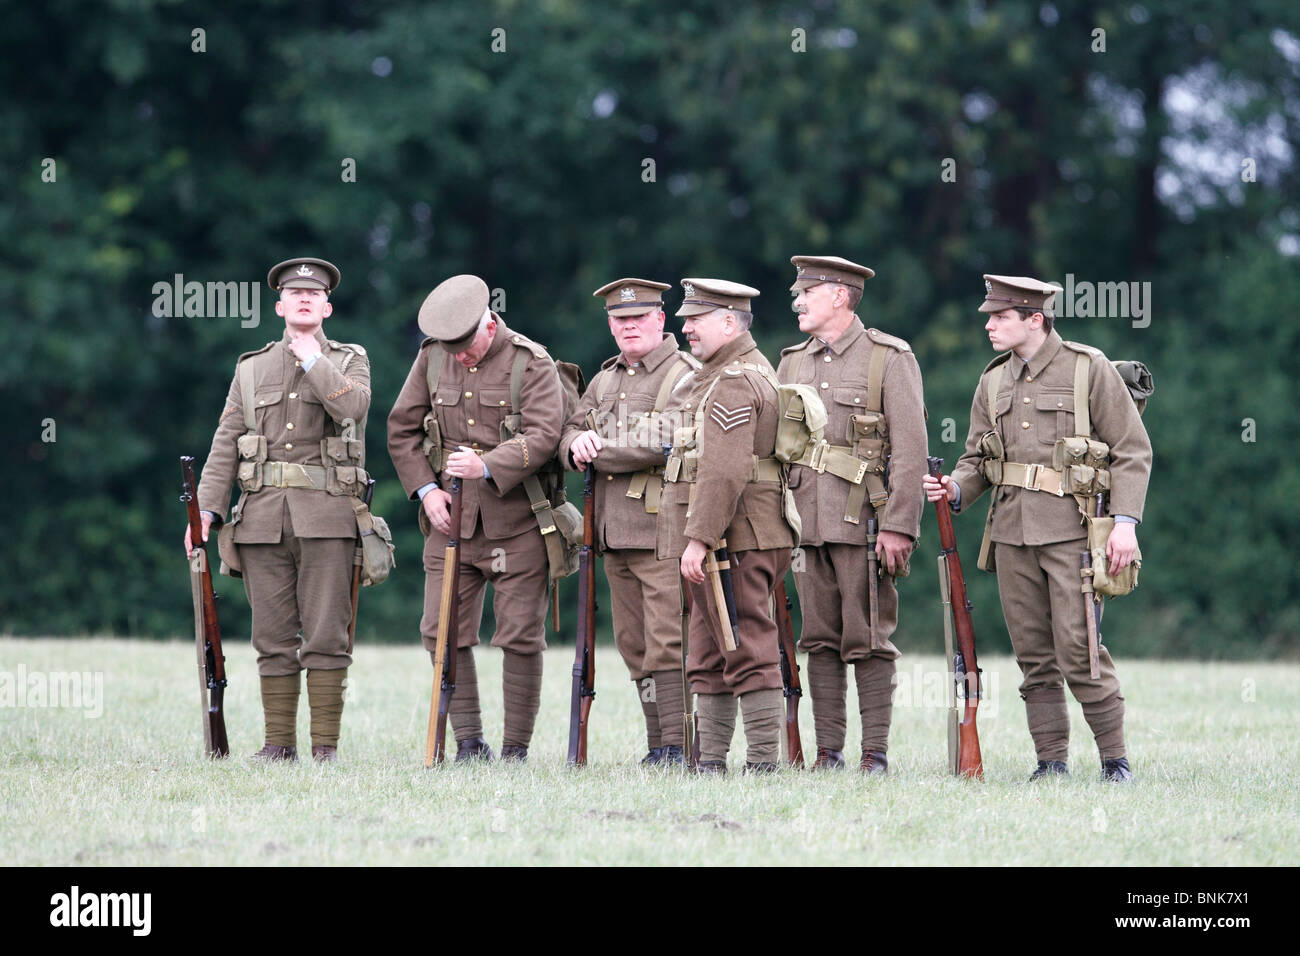 British Infantry from WW1, 1914-198, before tin hats became issue ...